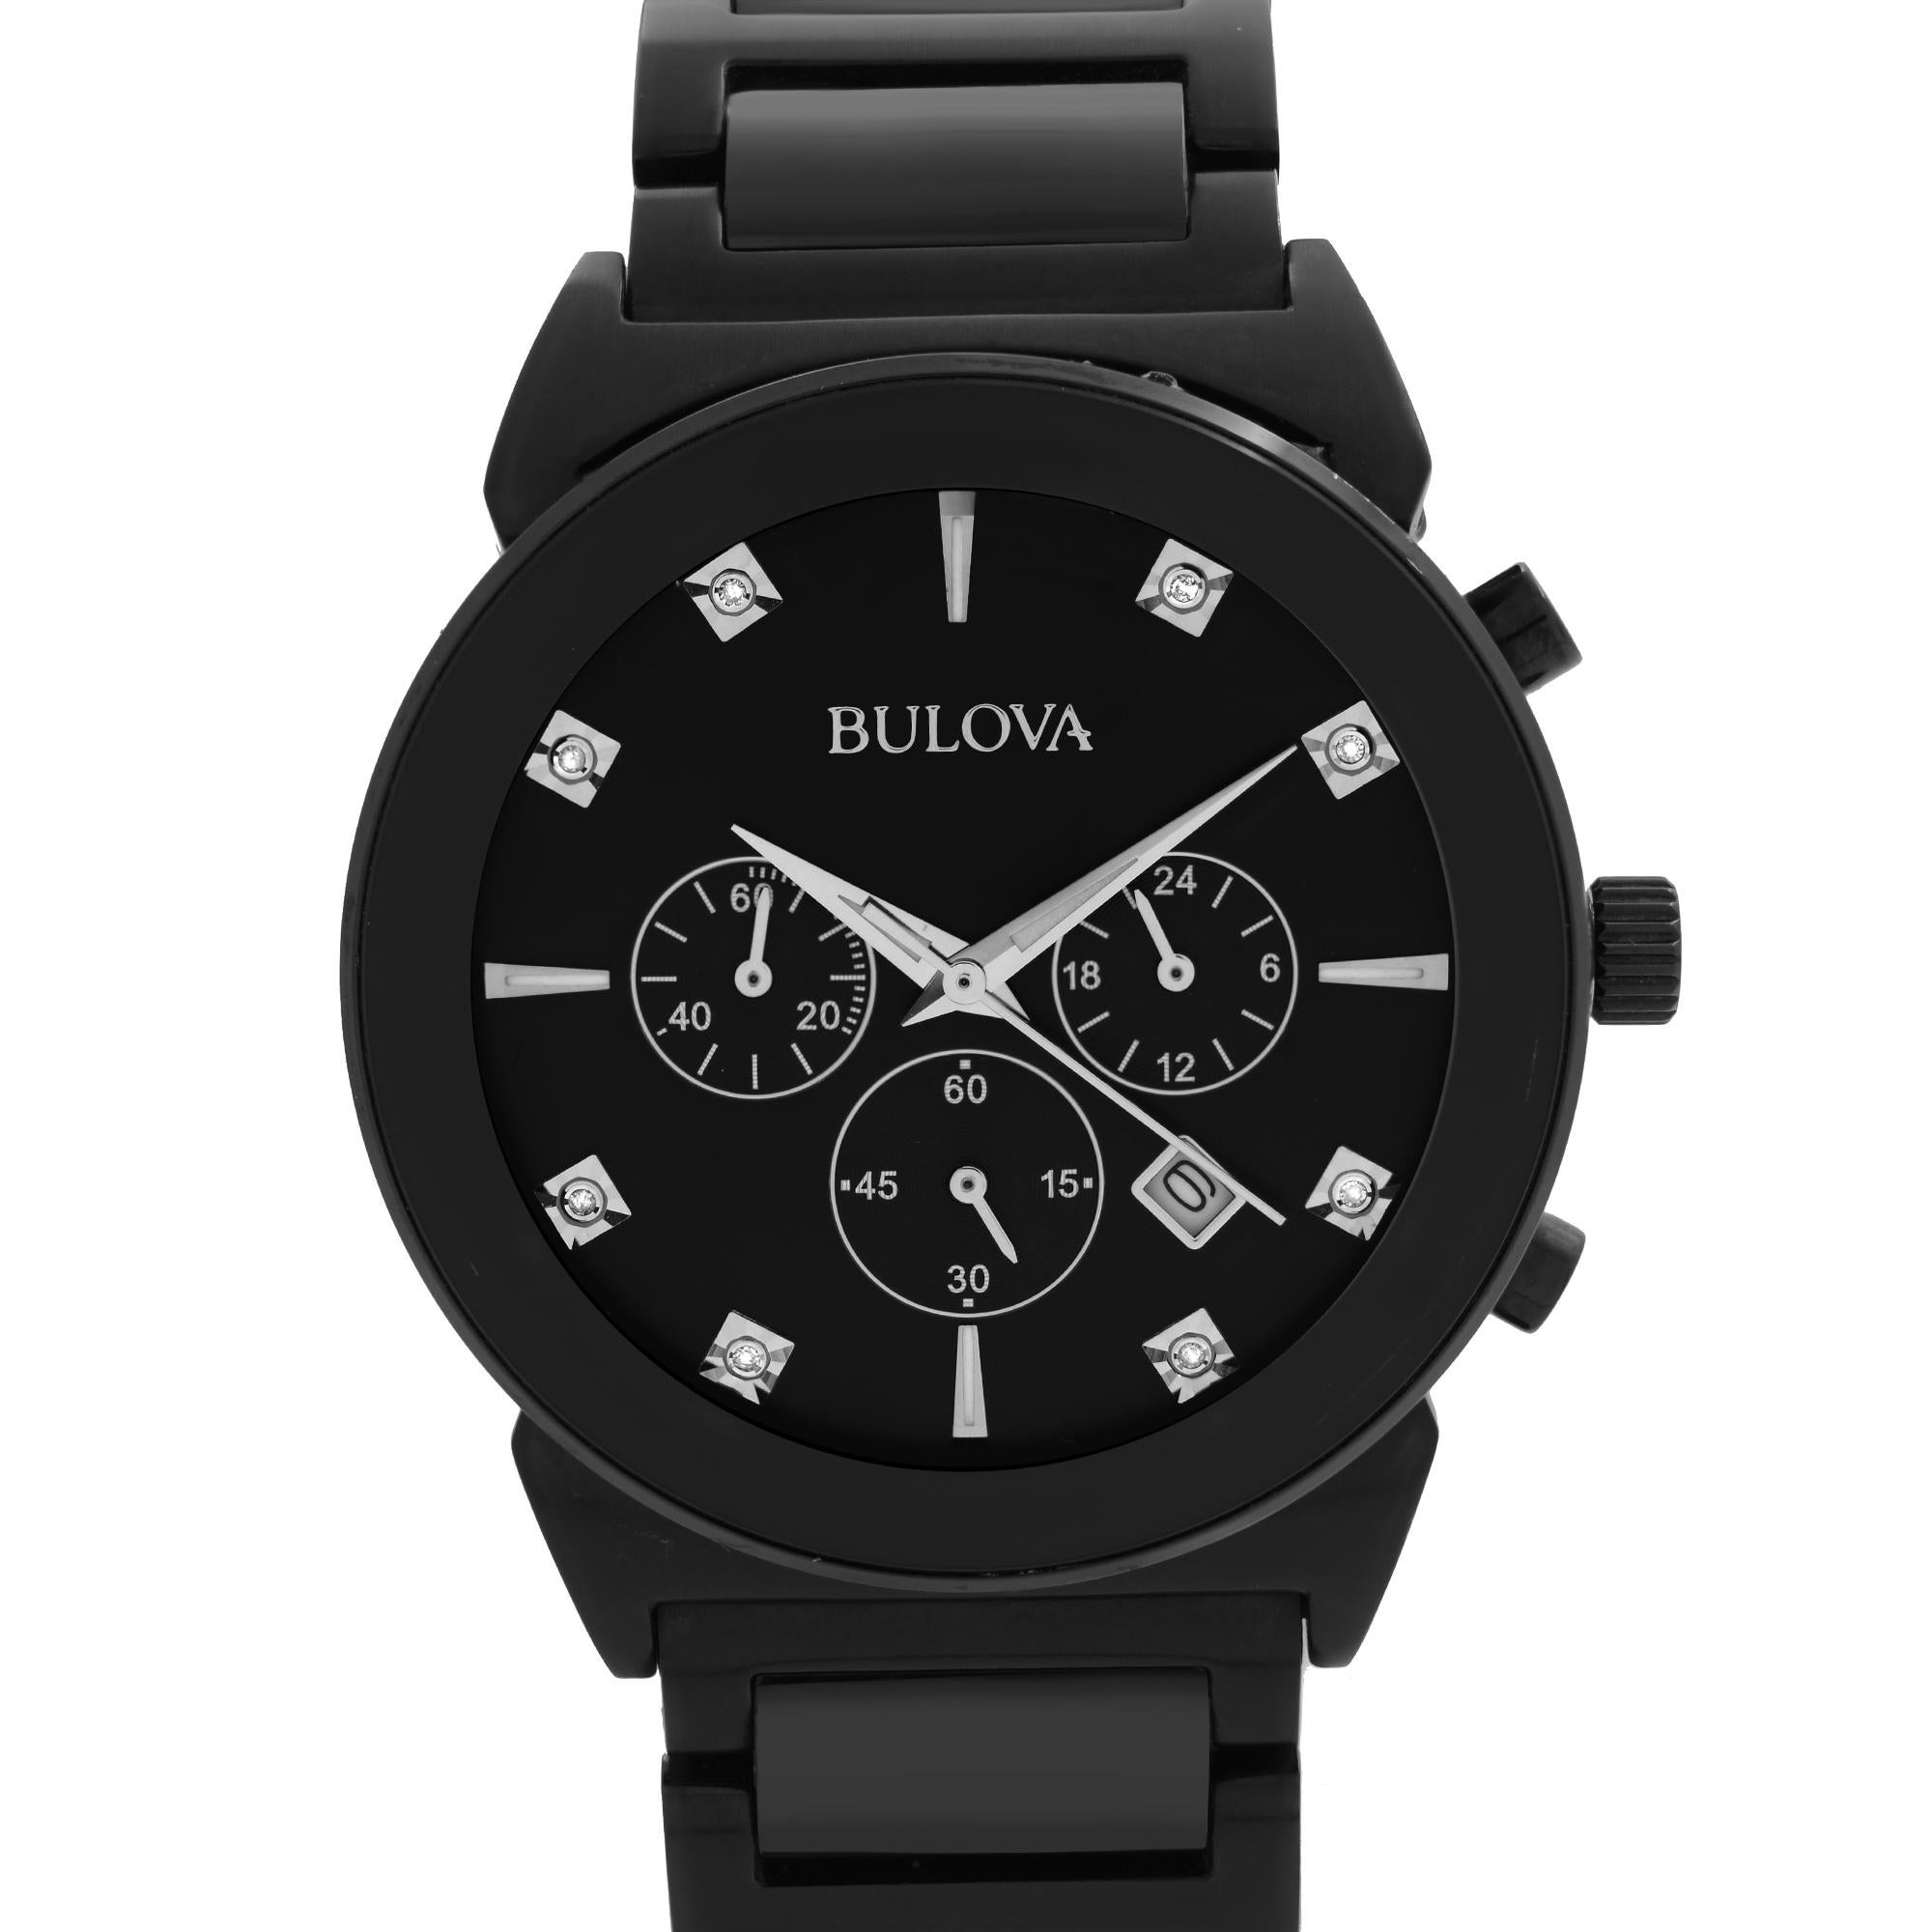 New with Defects Bulova Classic Watch 98D123. Small Scratches Around the Case Due to Opening the Case Back and Replacing a Battery. Original Box and Papers are Included. This Beautiful Timepiece Features: Black Ion-plated Stainless Steel Case and